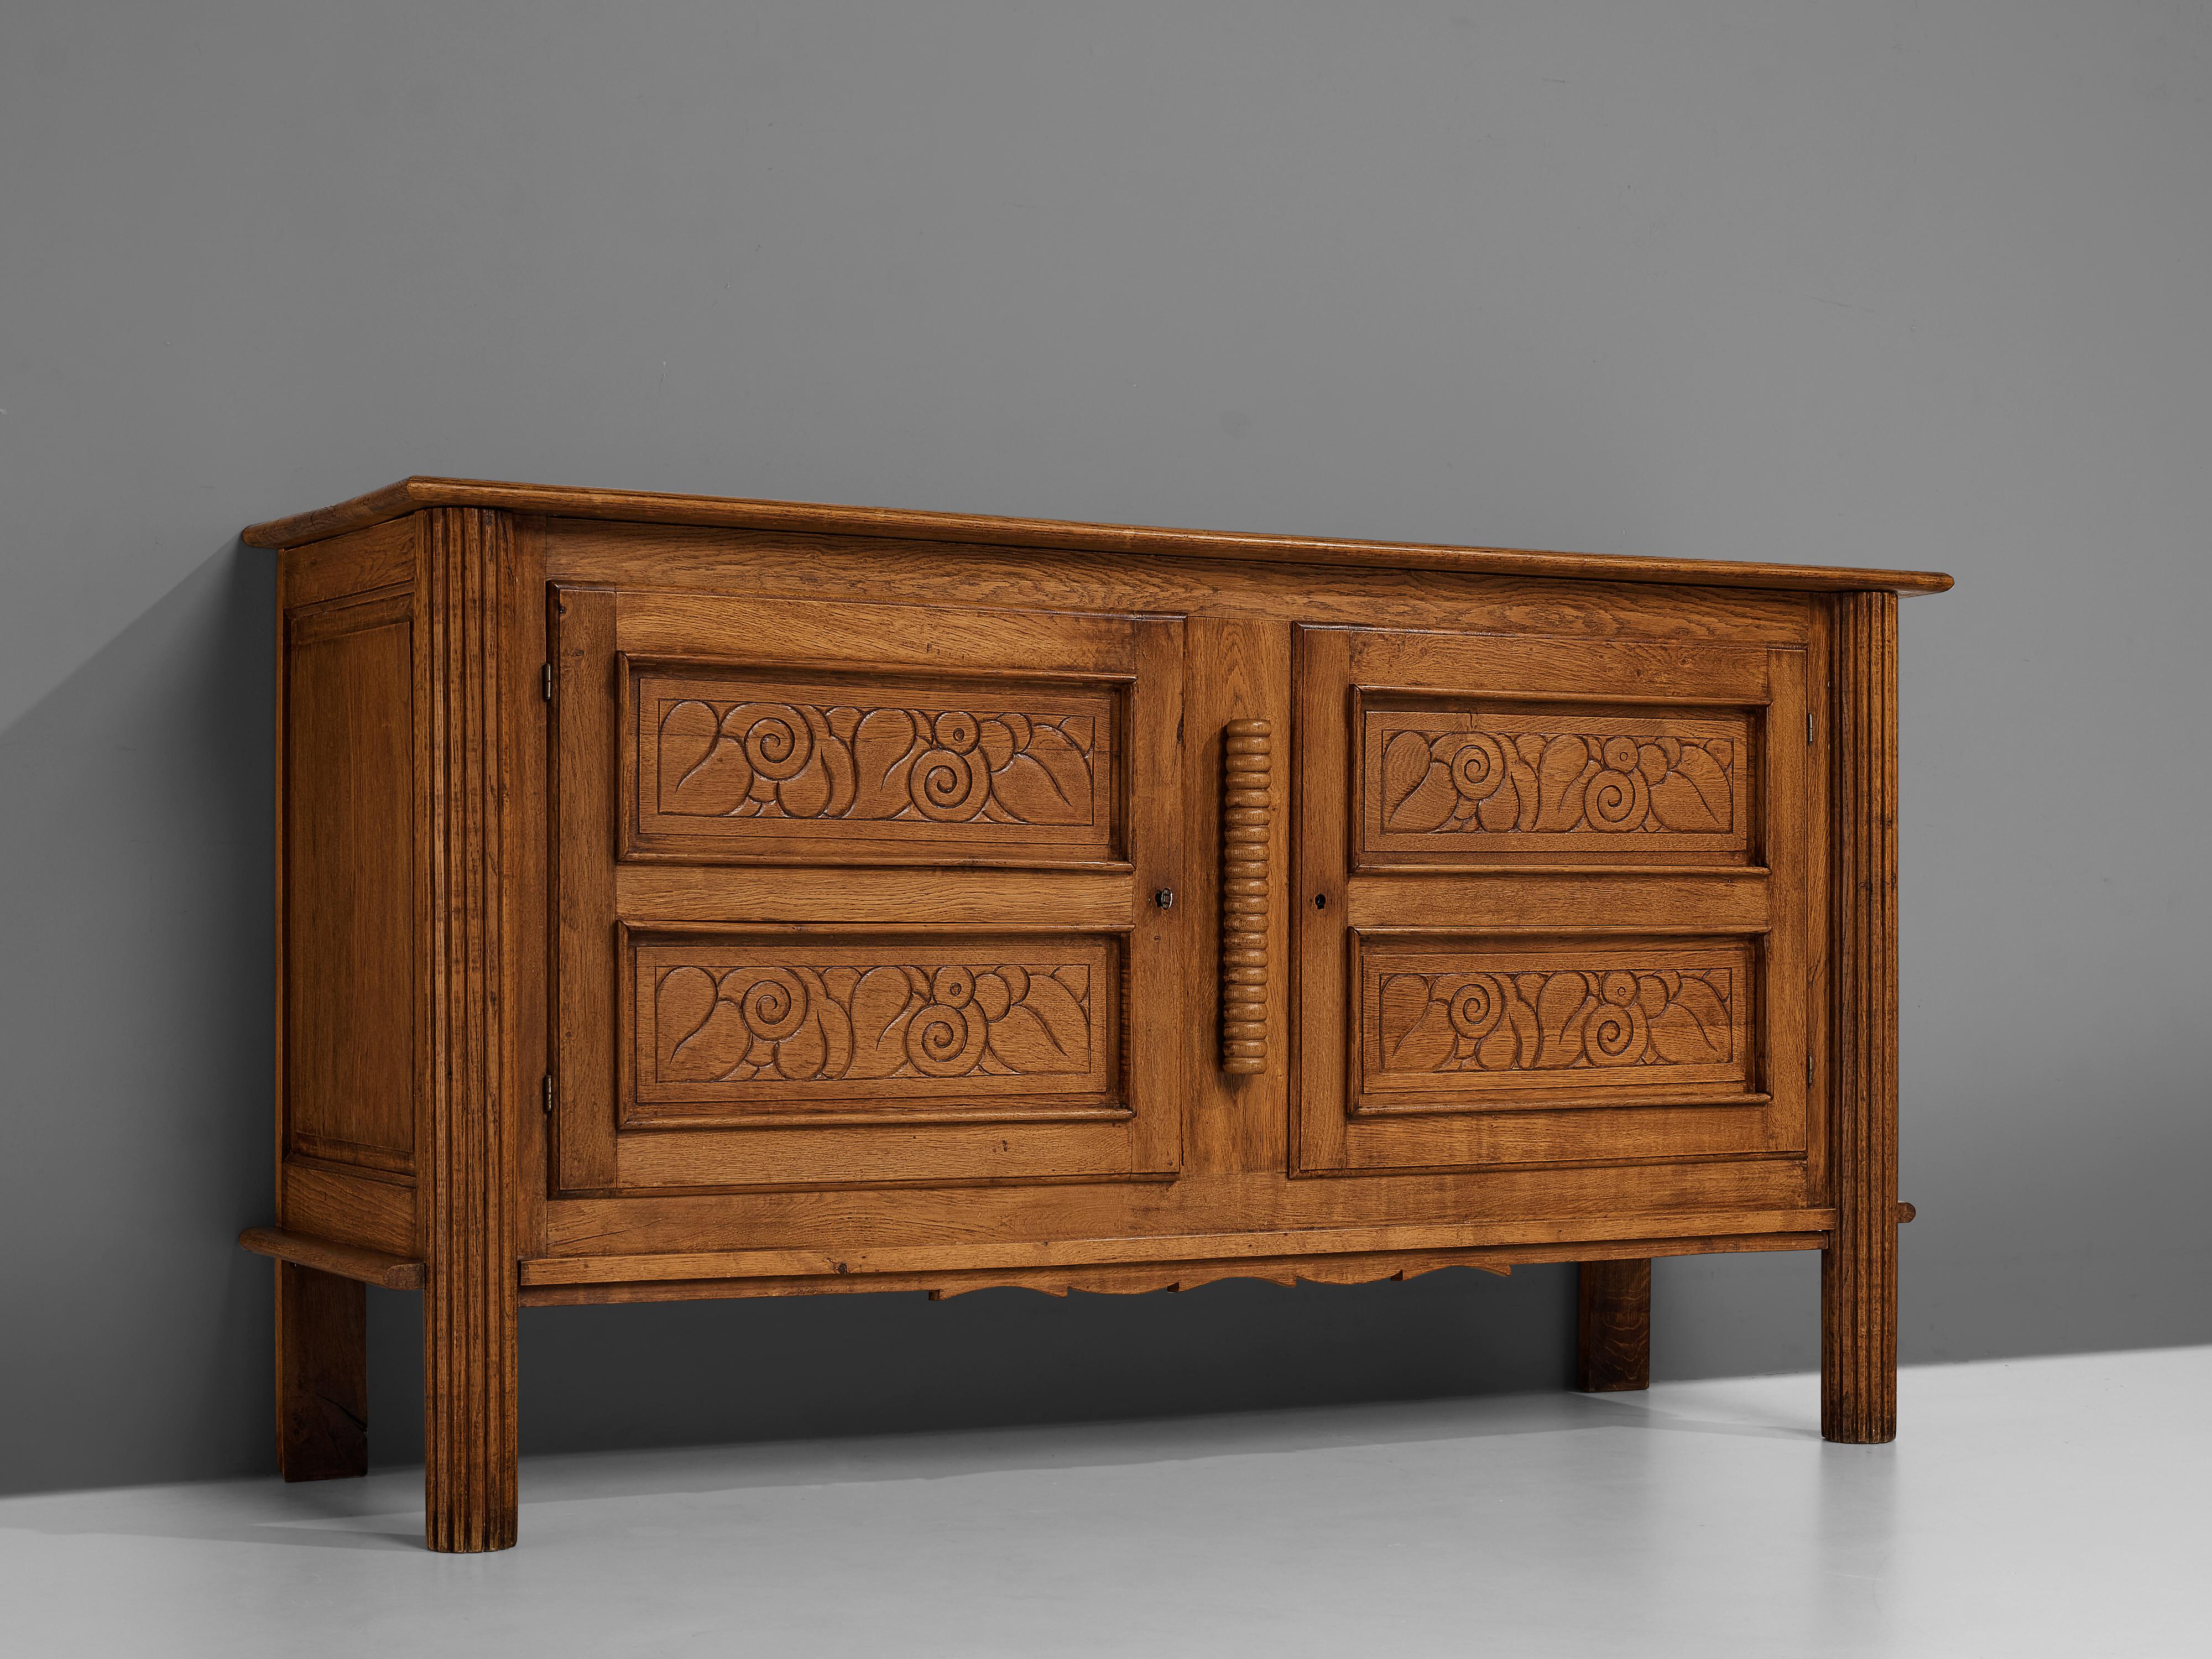 Sideboard, oak, France, 1940s

Beautifully decorated sideboard in a late art deco style. The sideboard has gorgeously ornamented doors that have an abstract floral motif. These embellished doors open with keys. The credenza stands on column-inspired